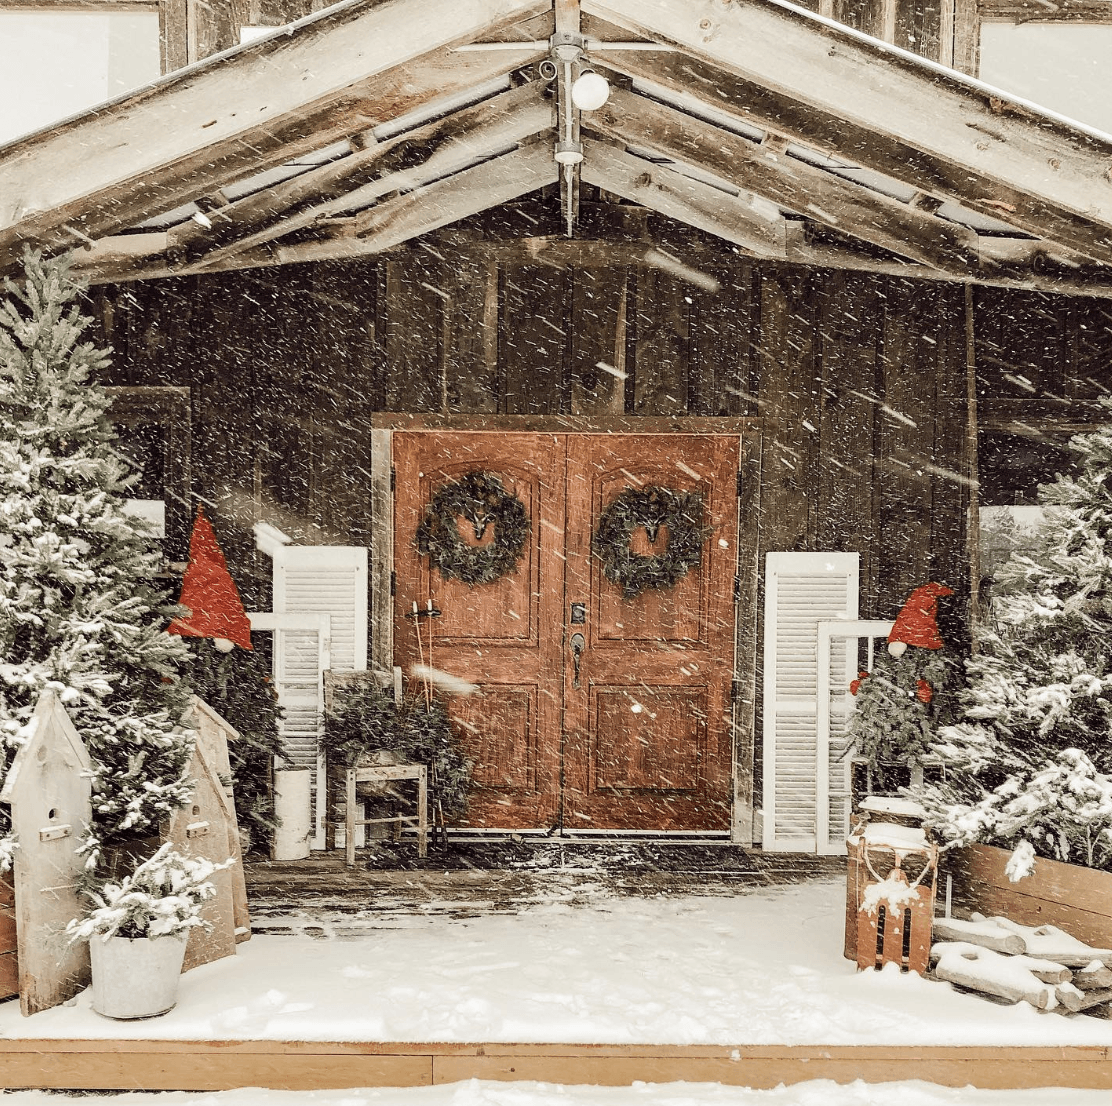 old antique barn in country snowing with double wreaths on red doors christmas trees covered in snow old shutters